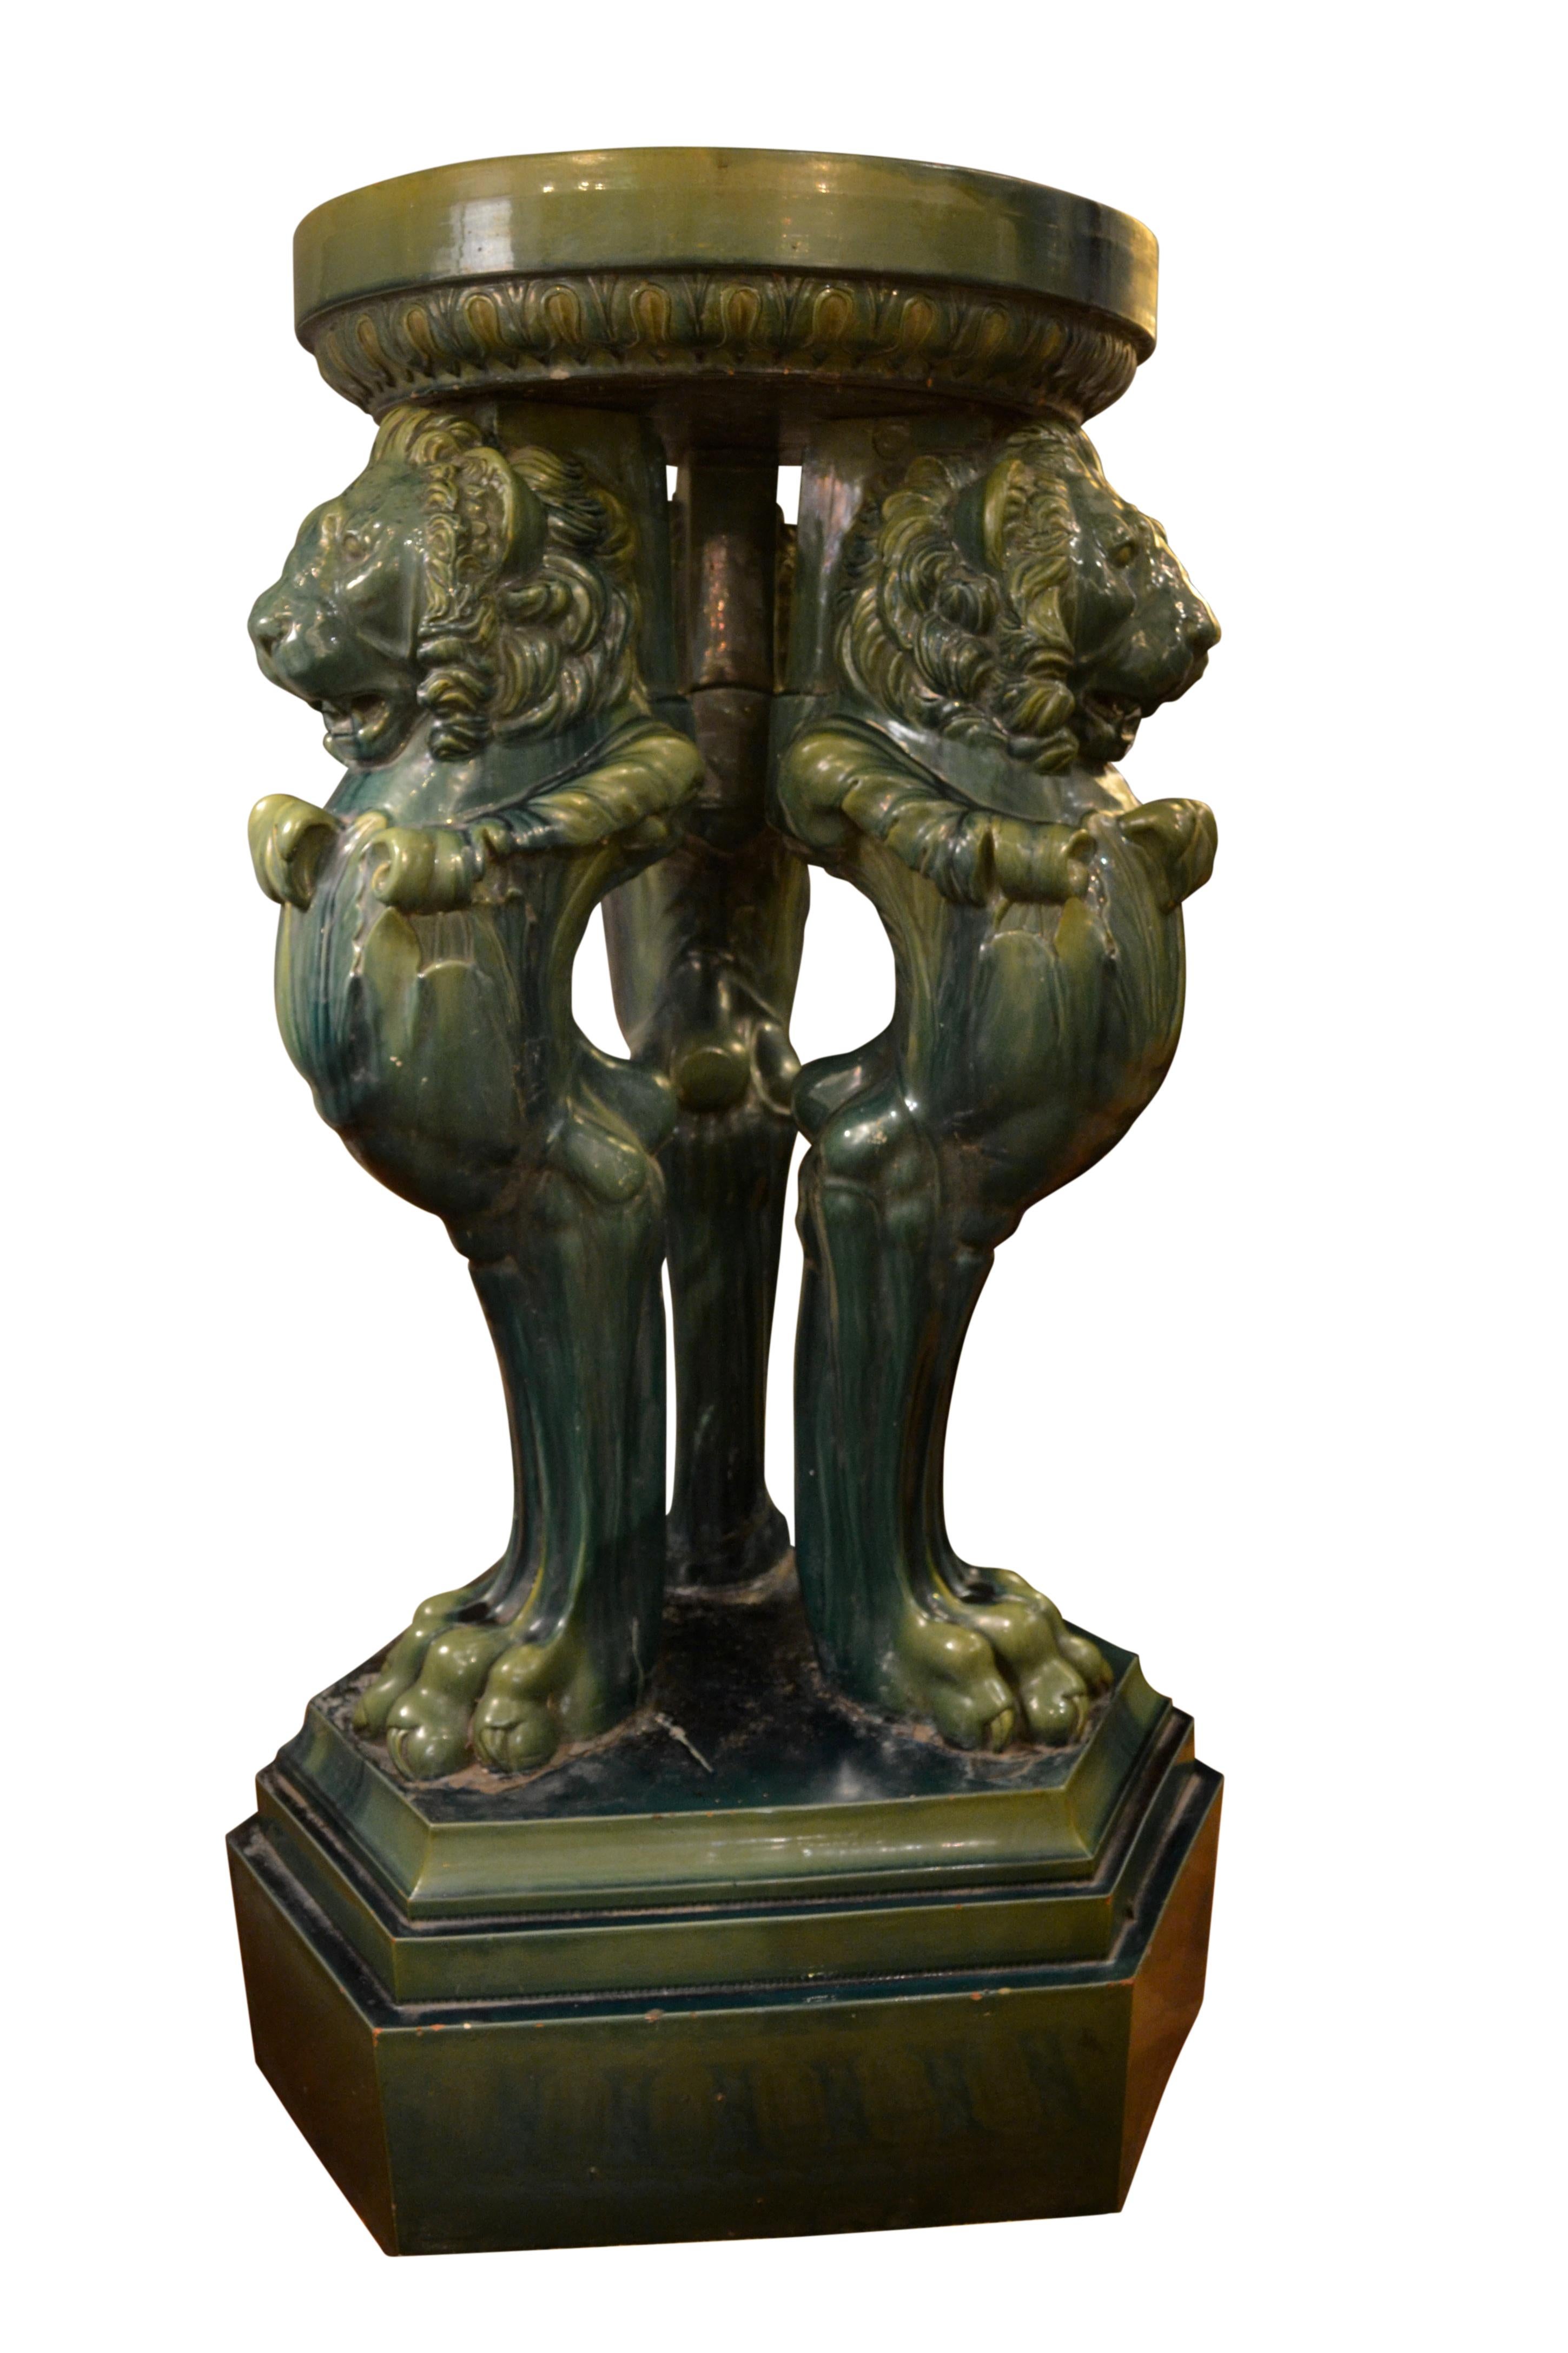 A very large Majolica Grand Tour pedestal having dark green glazing; the circular top (detachable) supported by  Trapezophorus  tripod base after the Roman. original found in Hadrian's Villa. The whole is set on  sit on a stepped triangular base.